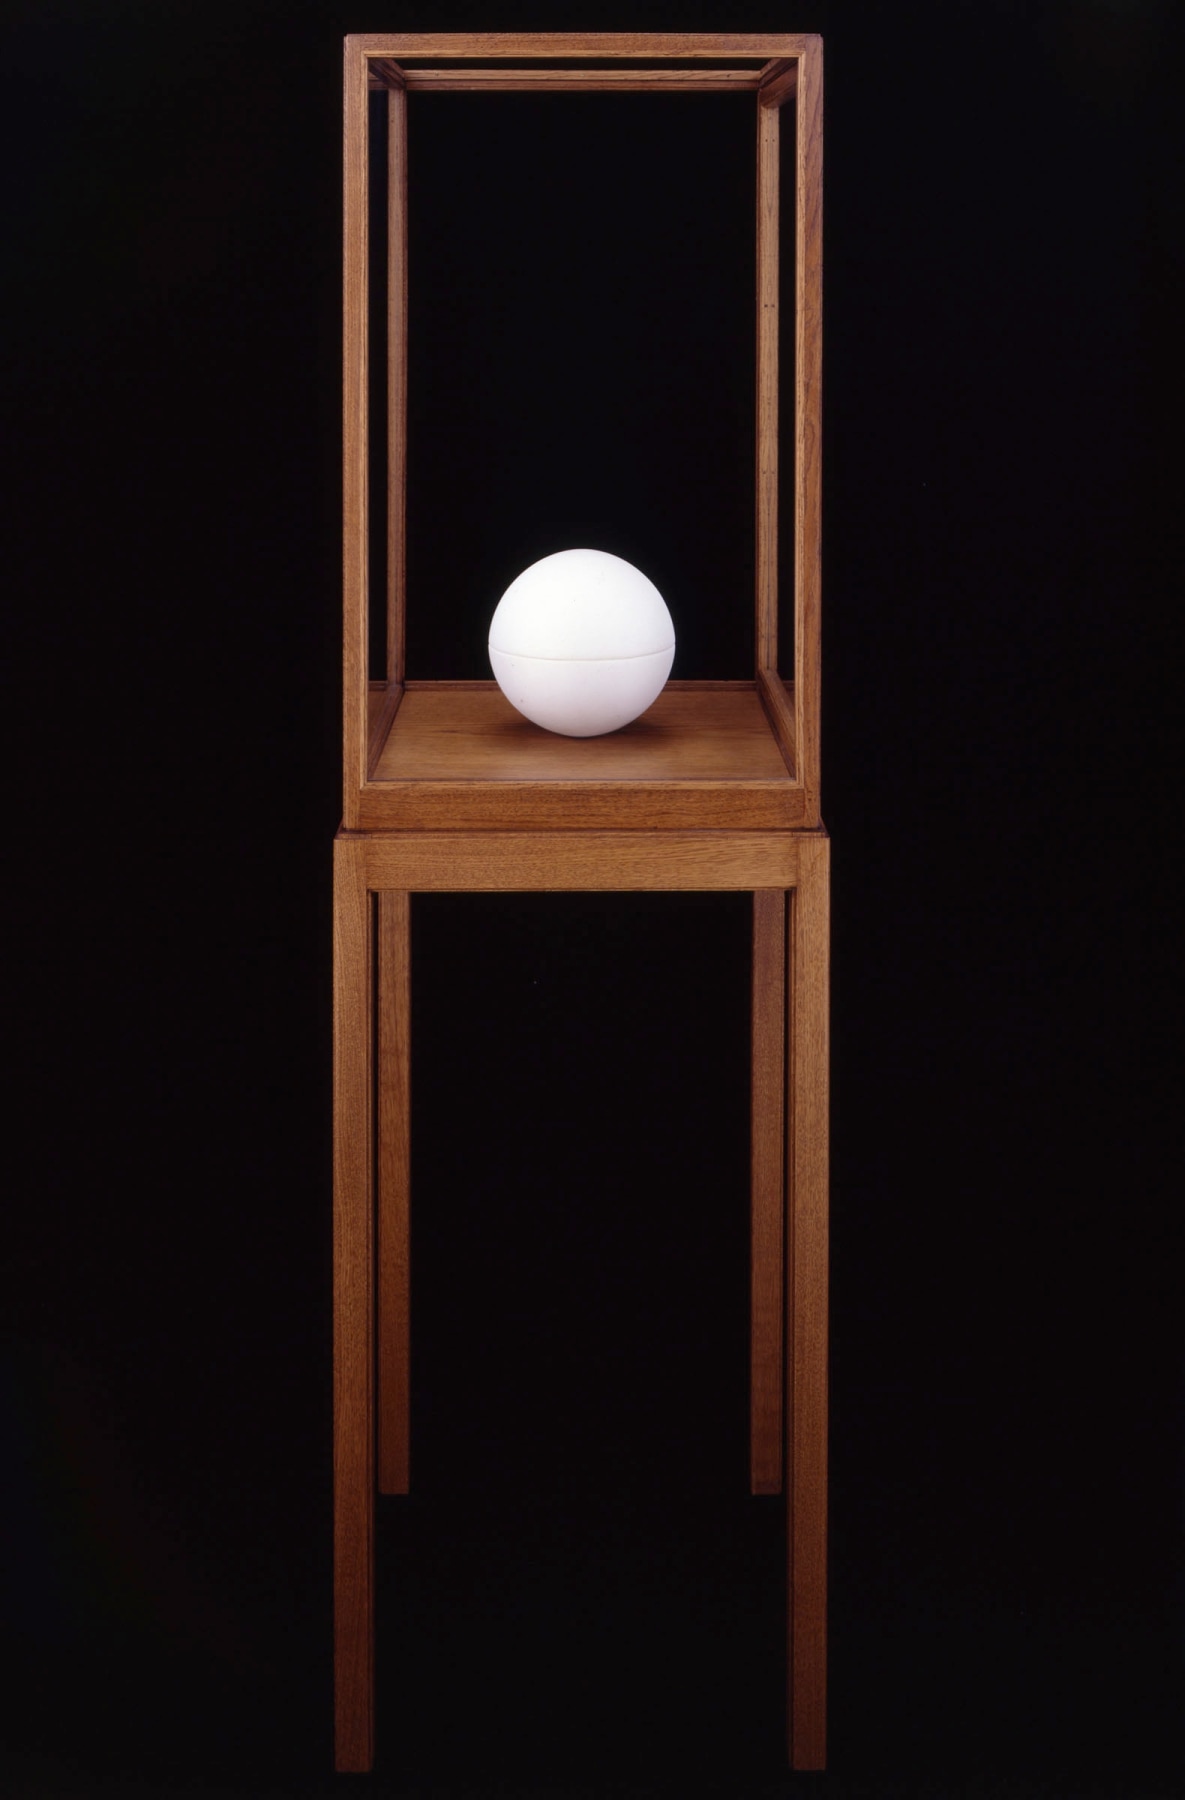 James Lee Byars

&amp;ldquo;The Spherical Book&amp;rdquo;, 1989

Thassos marble

Two parts, overall diameter:

8 1/4 inches

21 cm

JB 109/2

$250,000